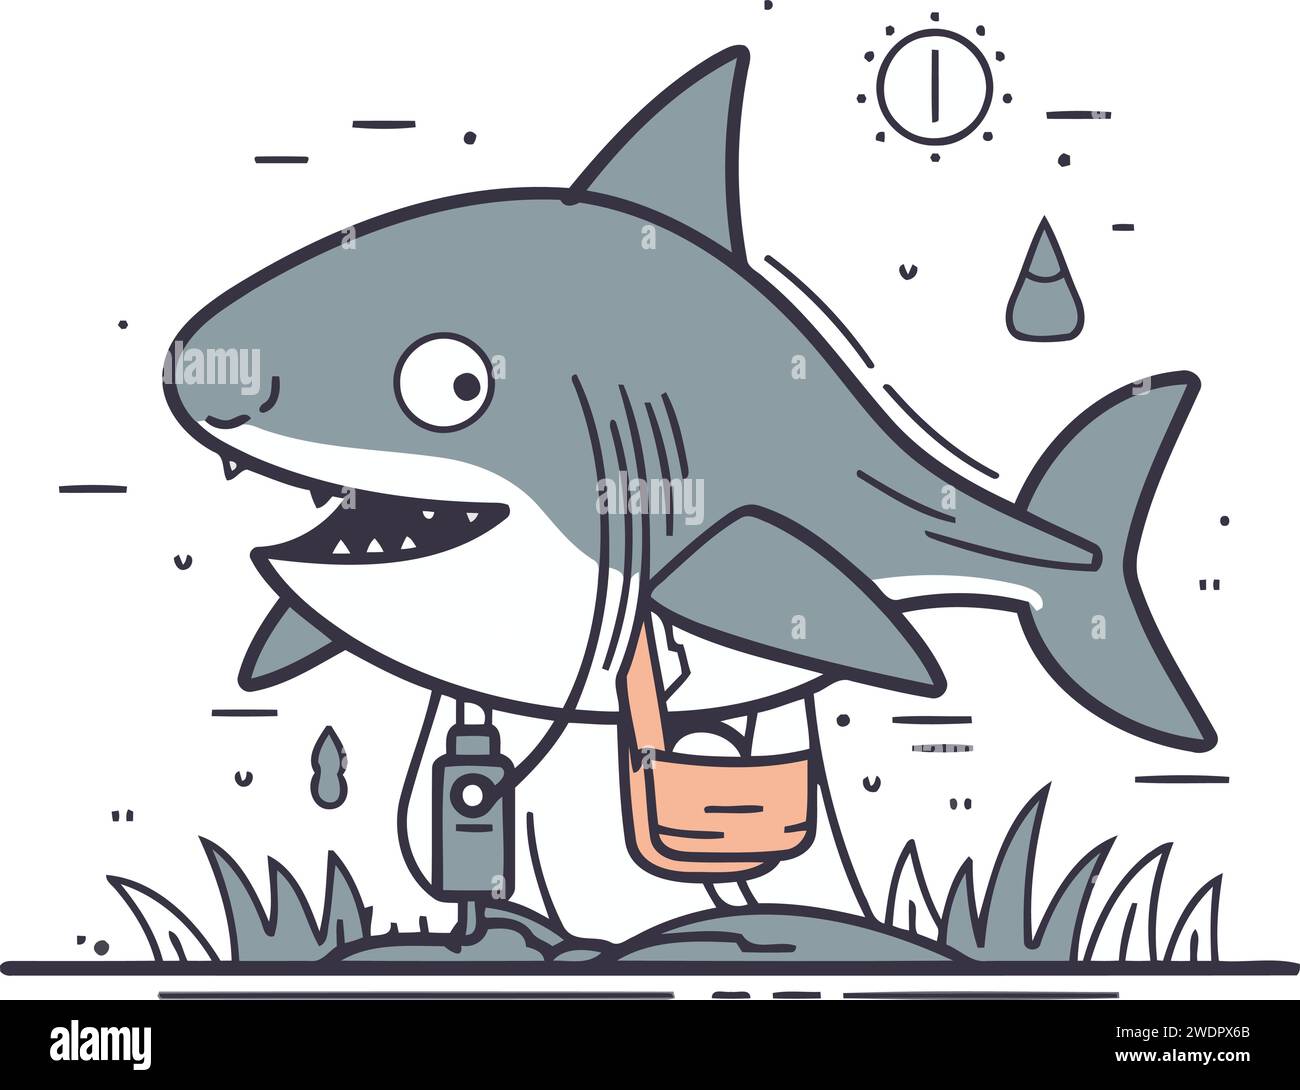 Fishing for shark Stock Vector Images - Page 2 - Alamy